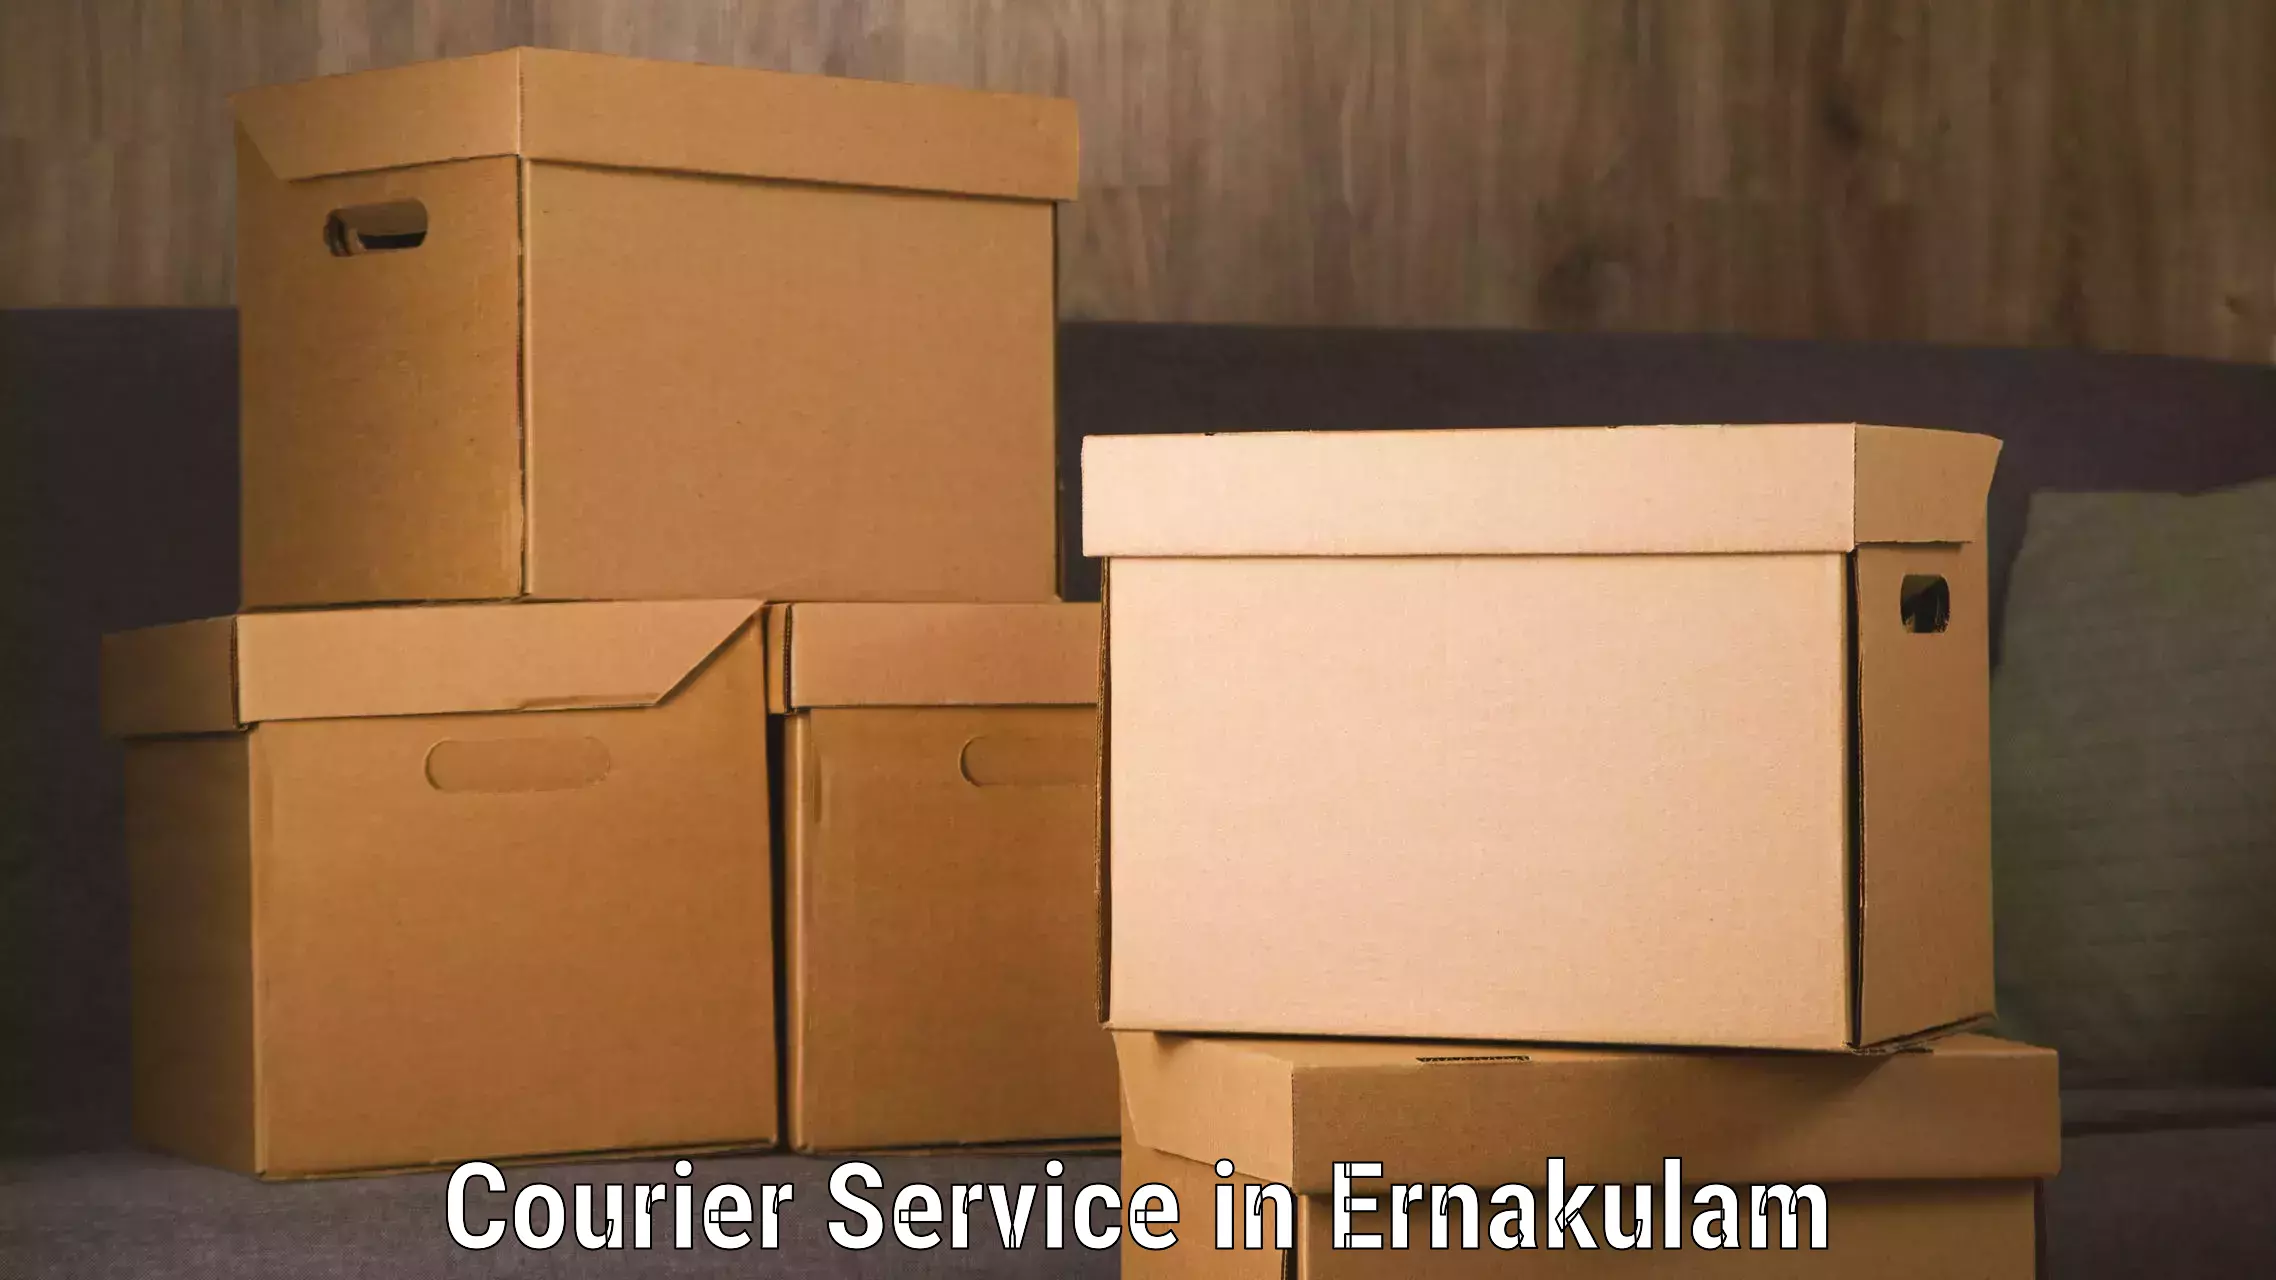 Specialized courier services in Ernakulam